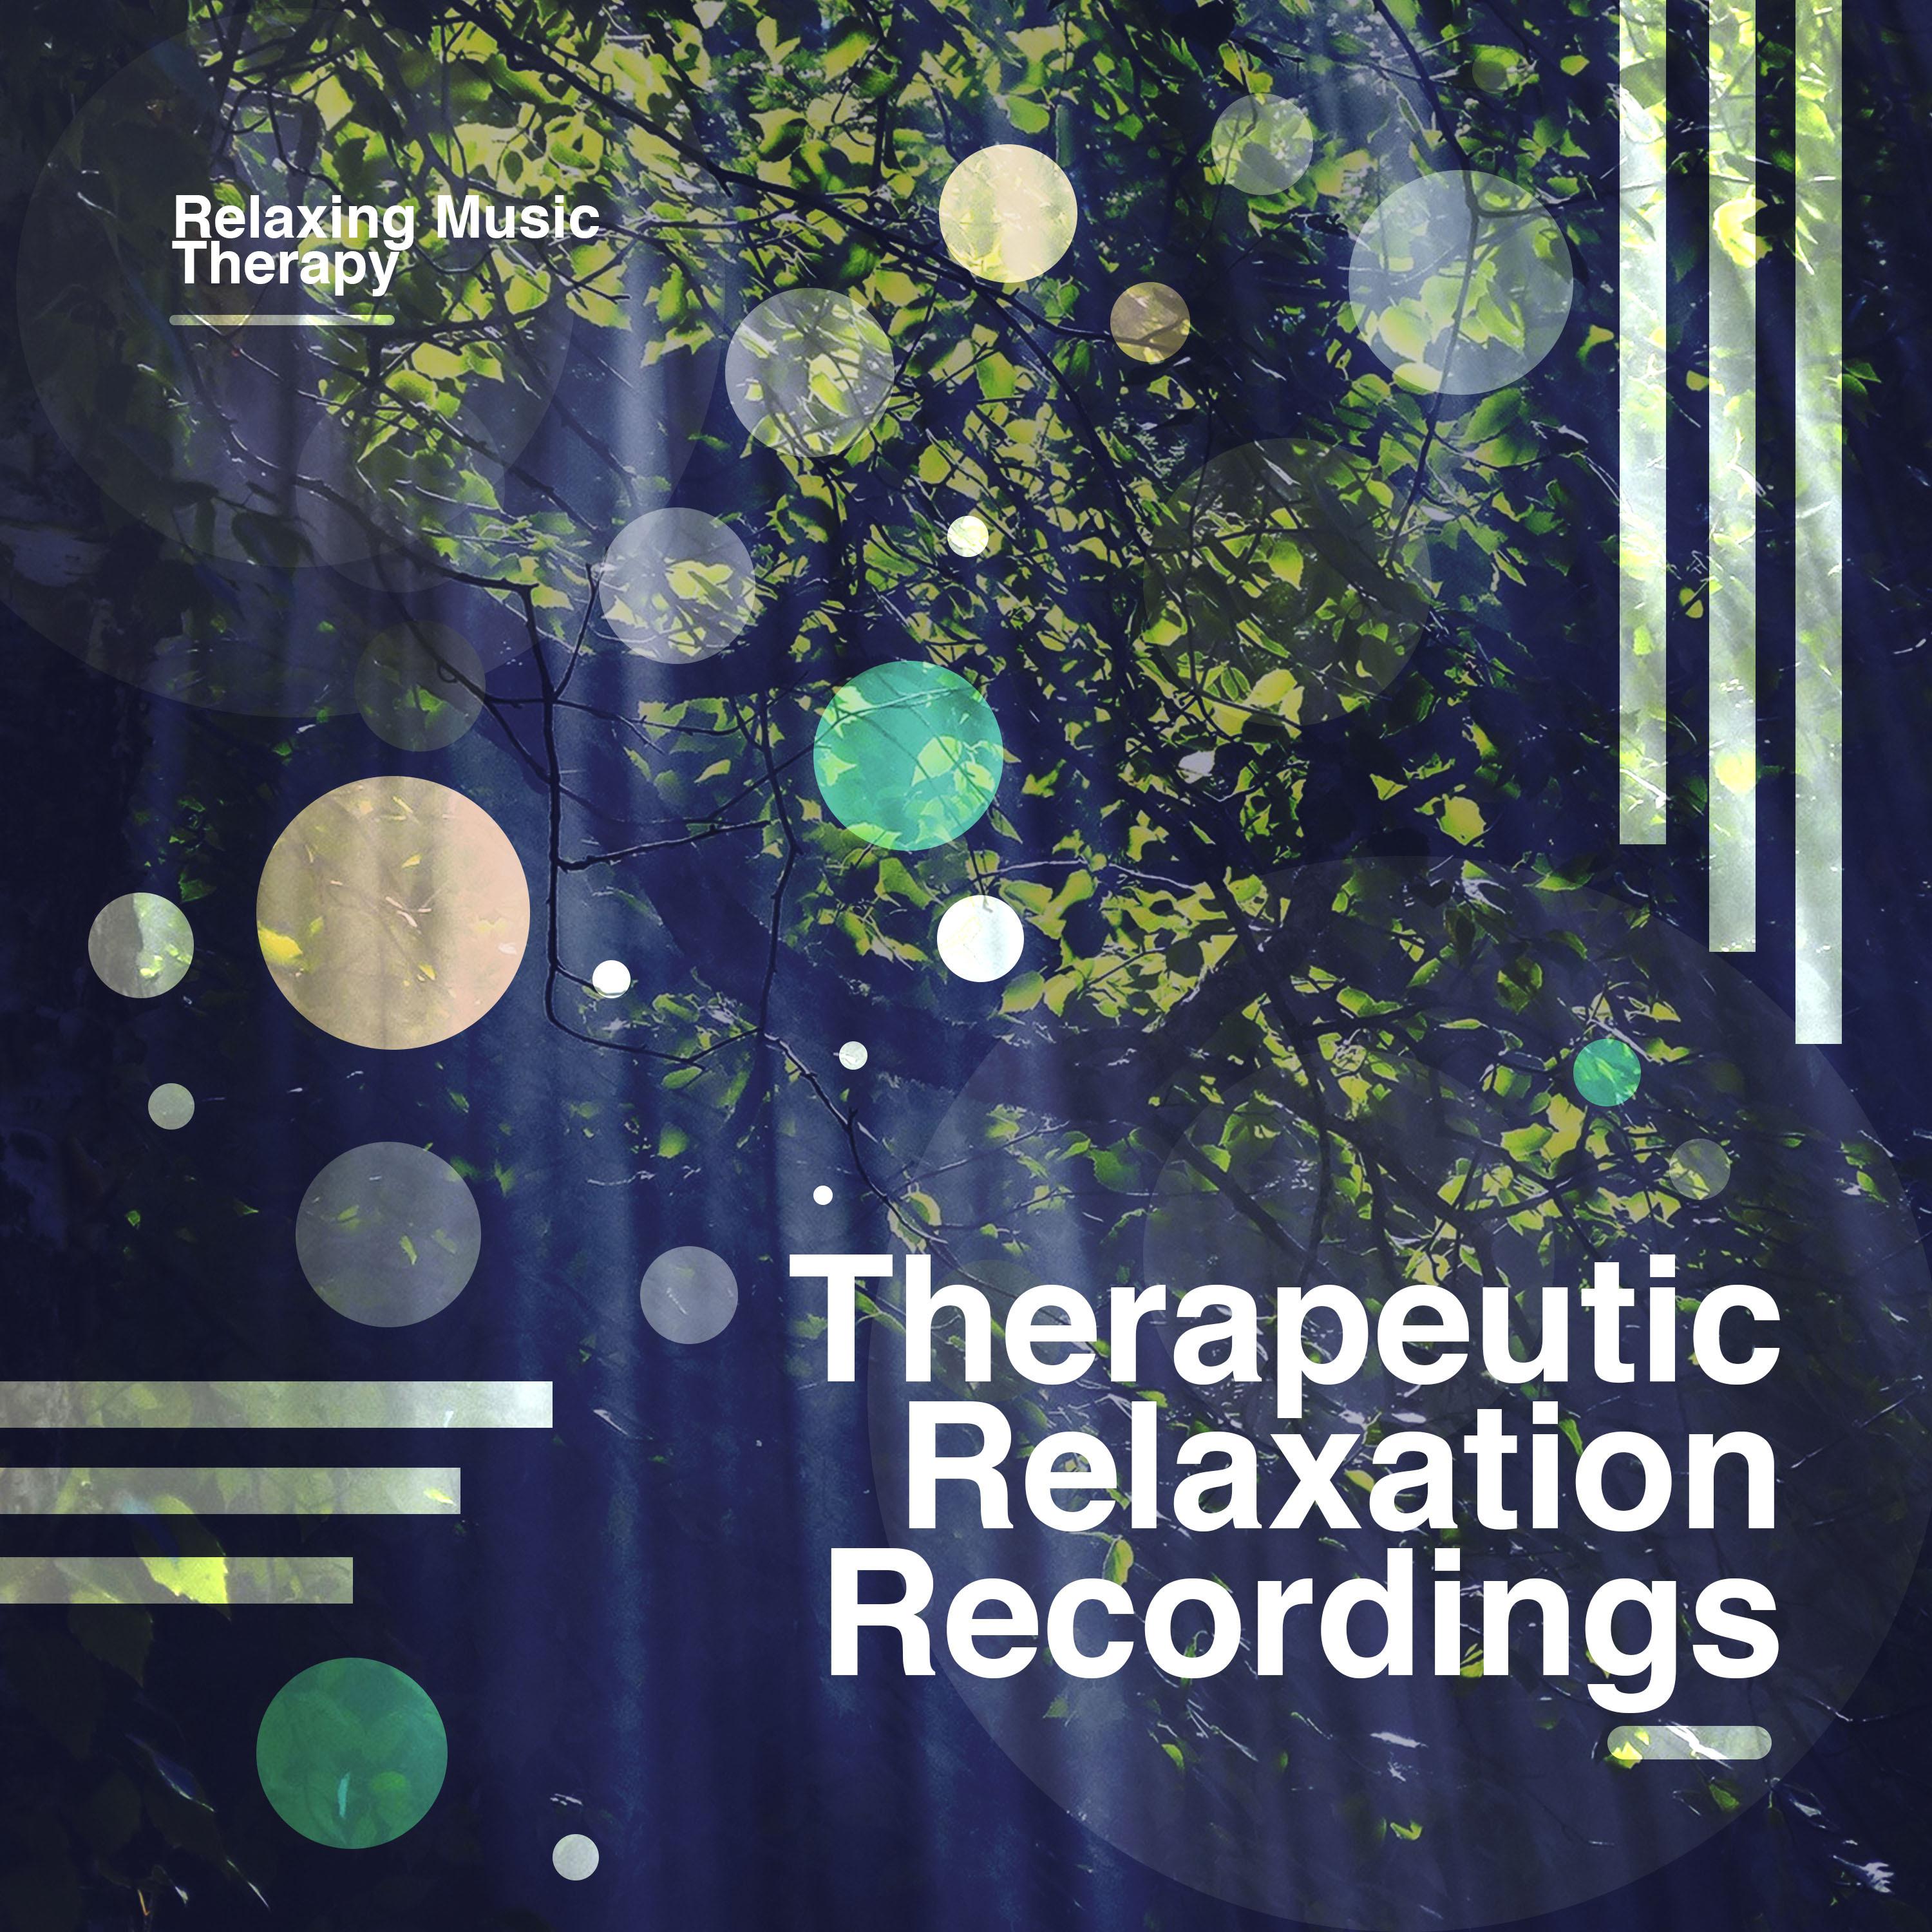 Therapeutic Relaxation Recordings